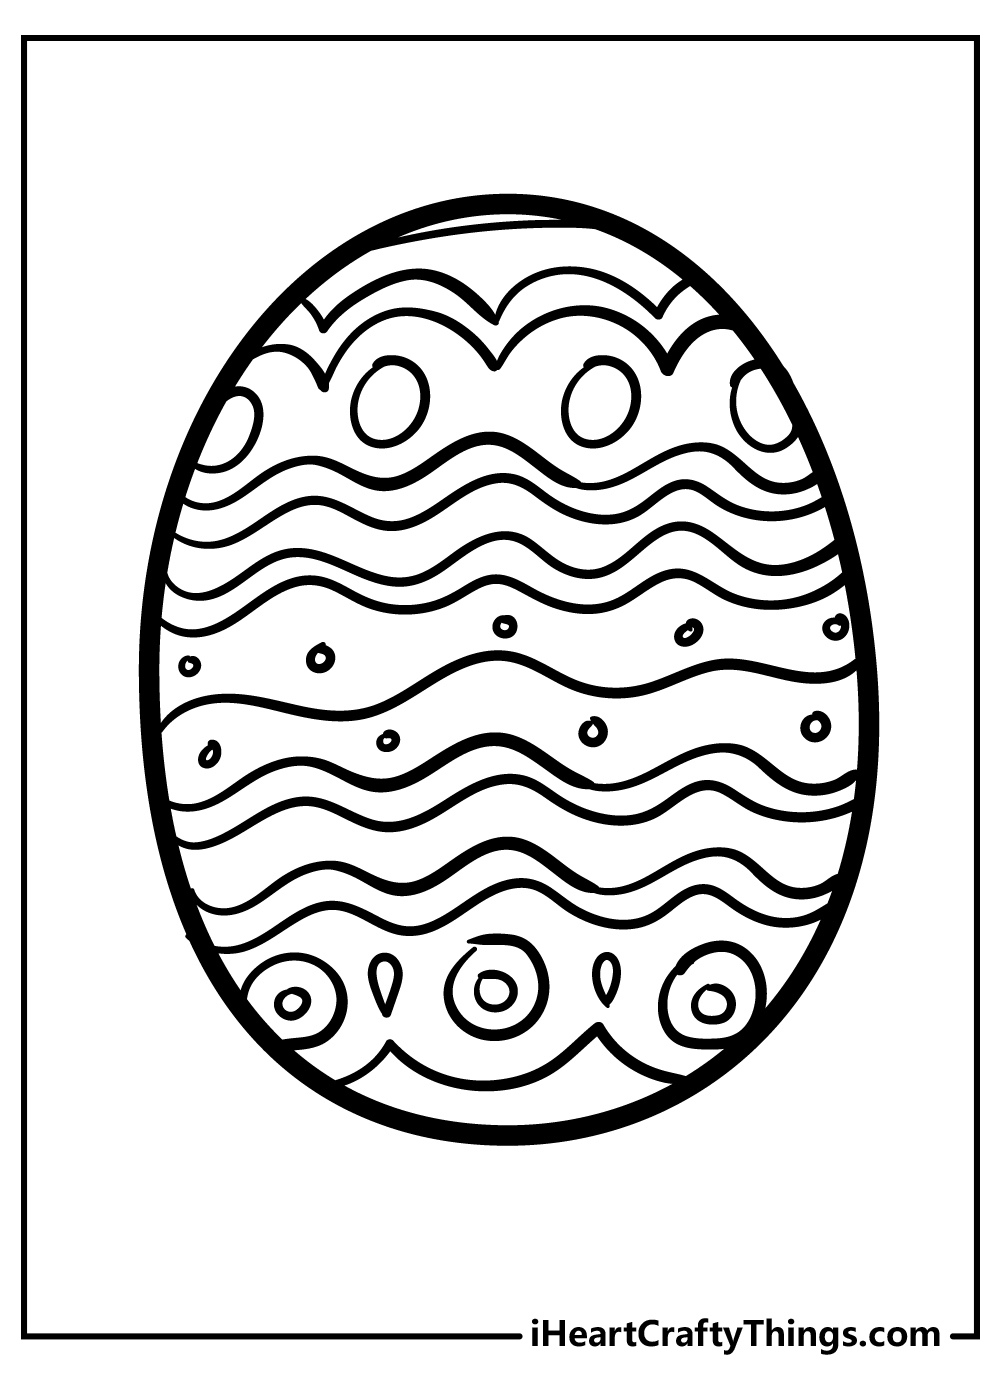 Easter egg coloring book free printable